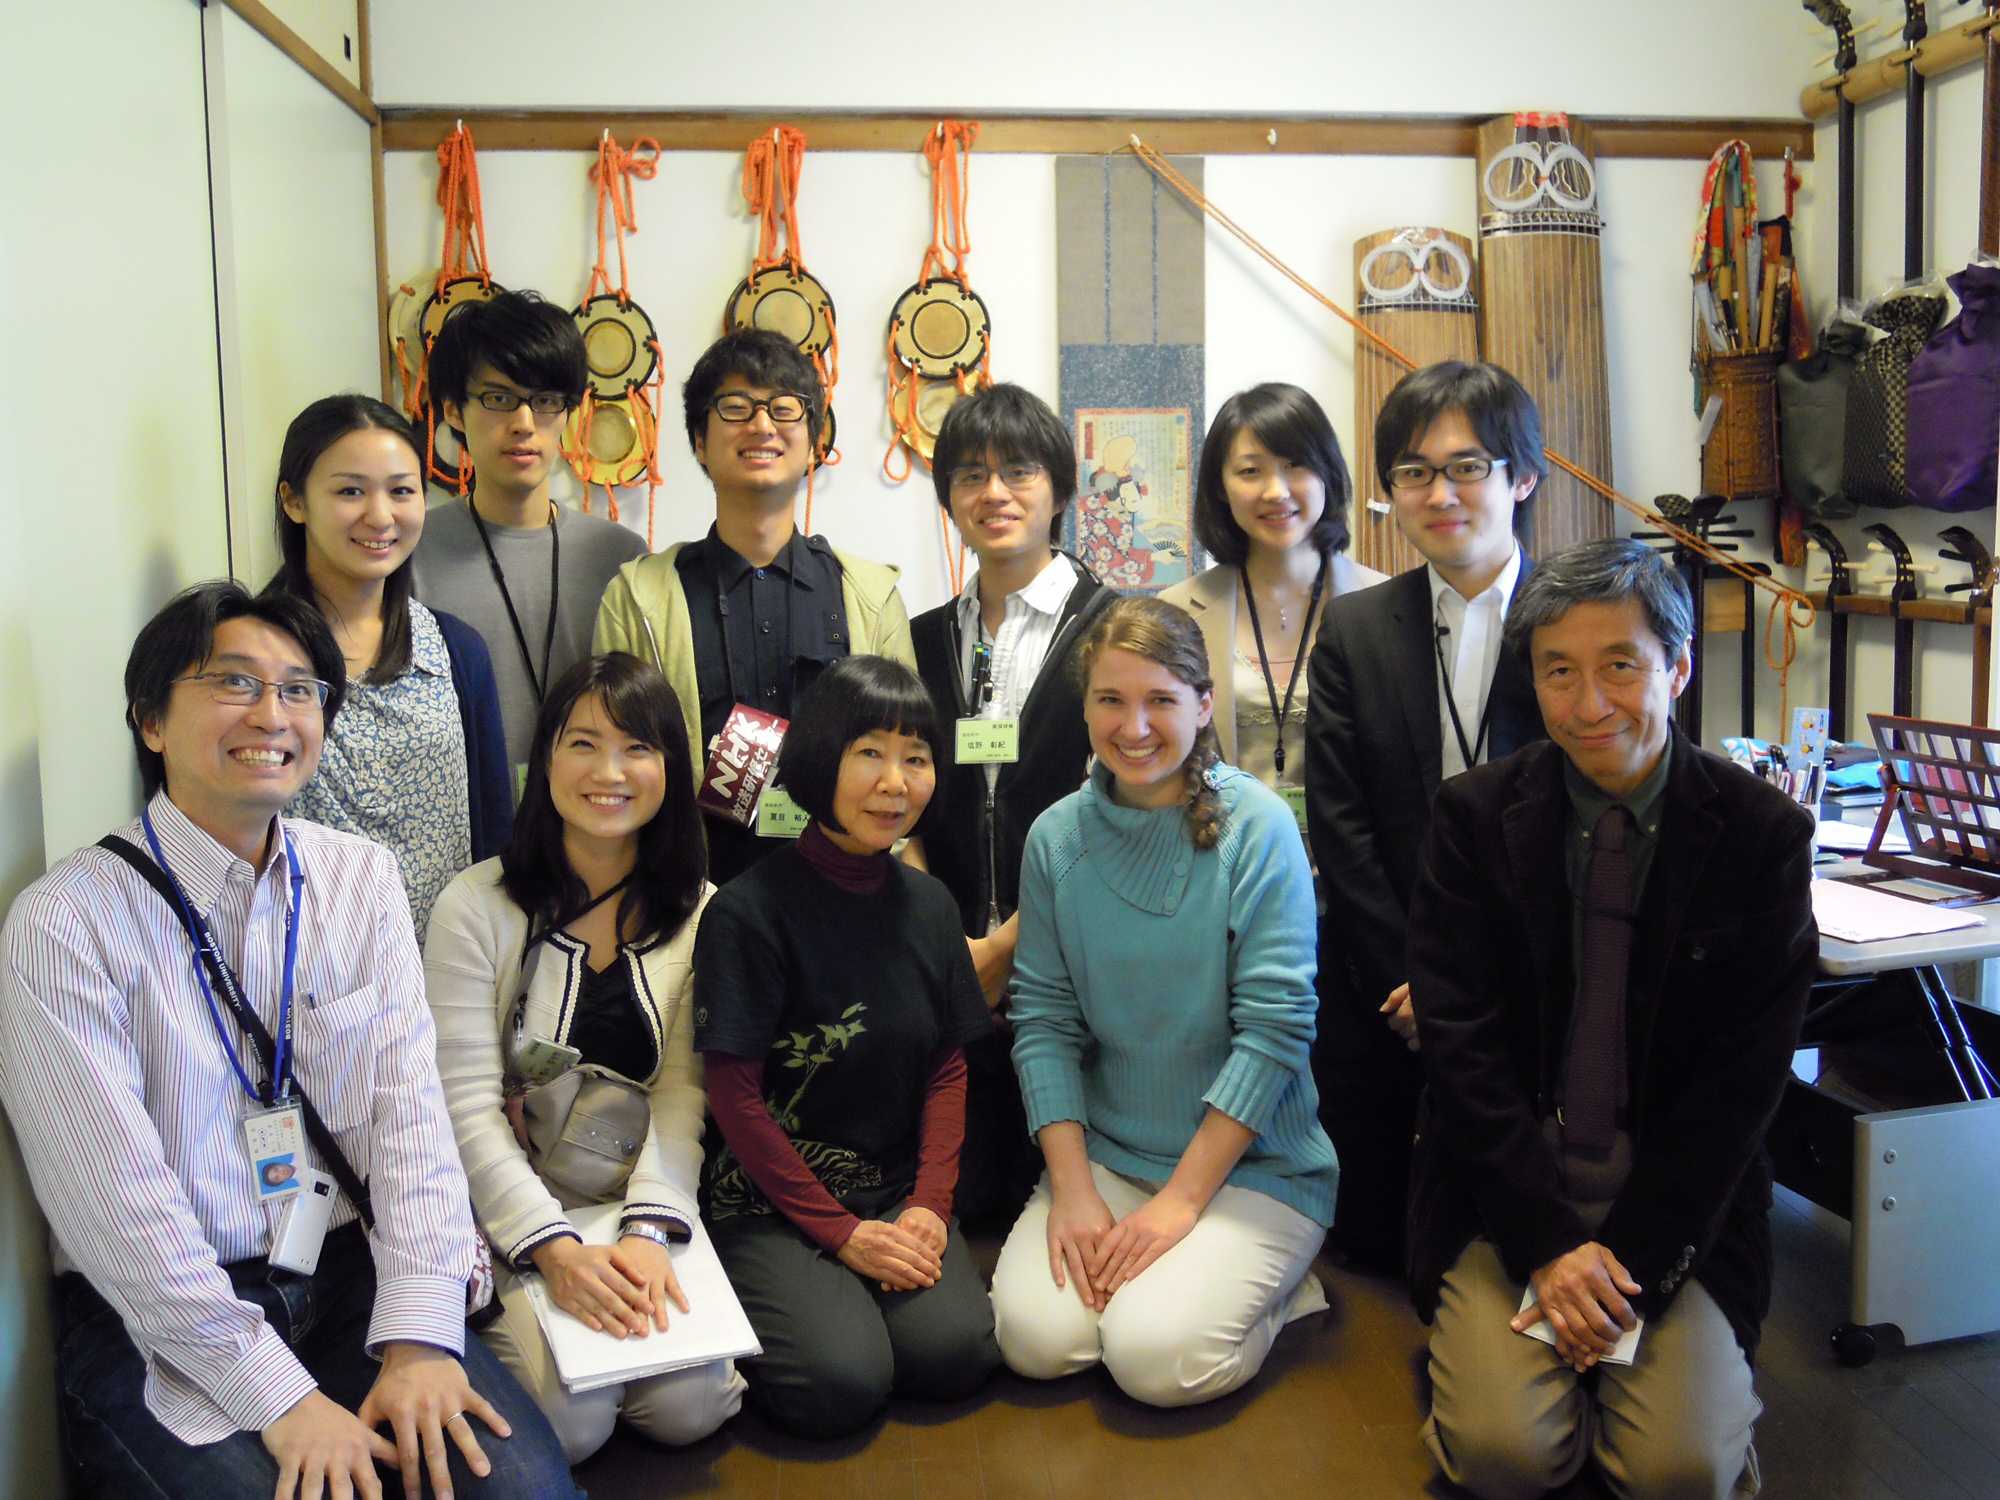 Group photo of when NHK came to interview Makoto Nishimura.